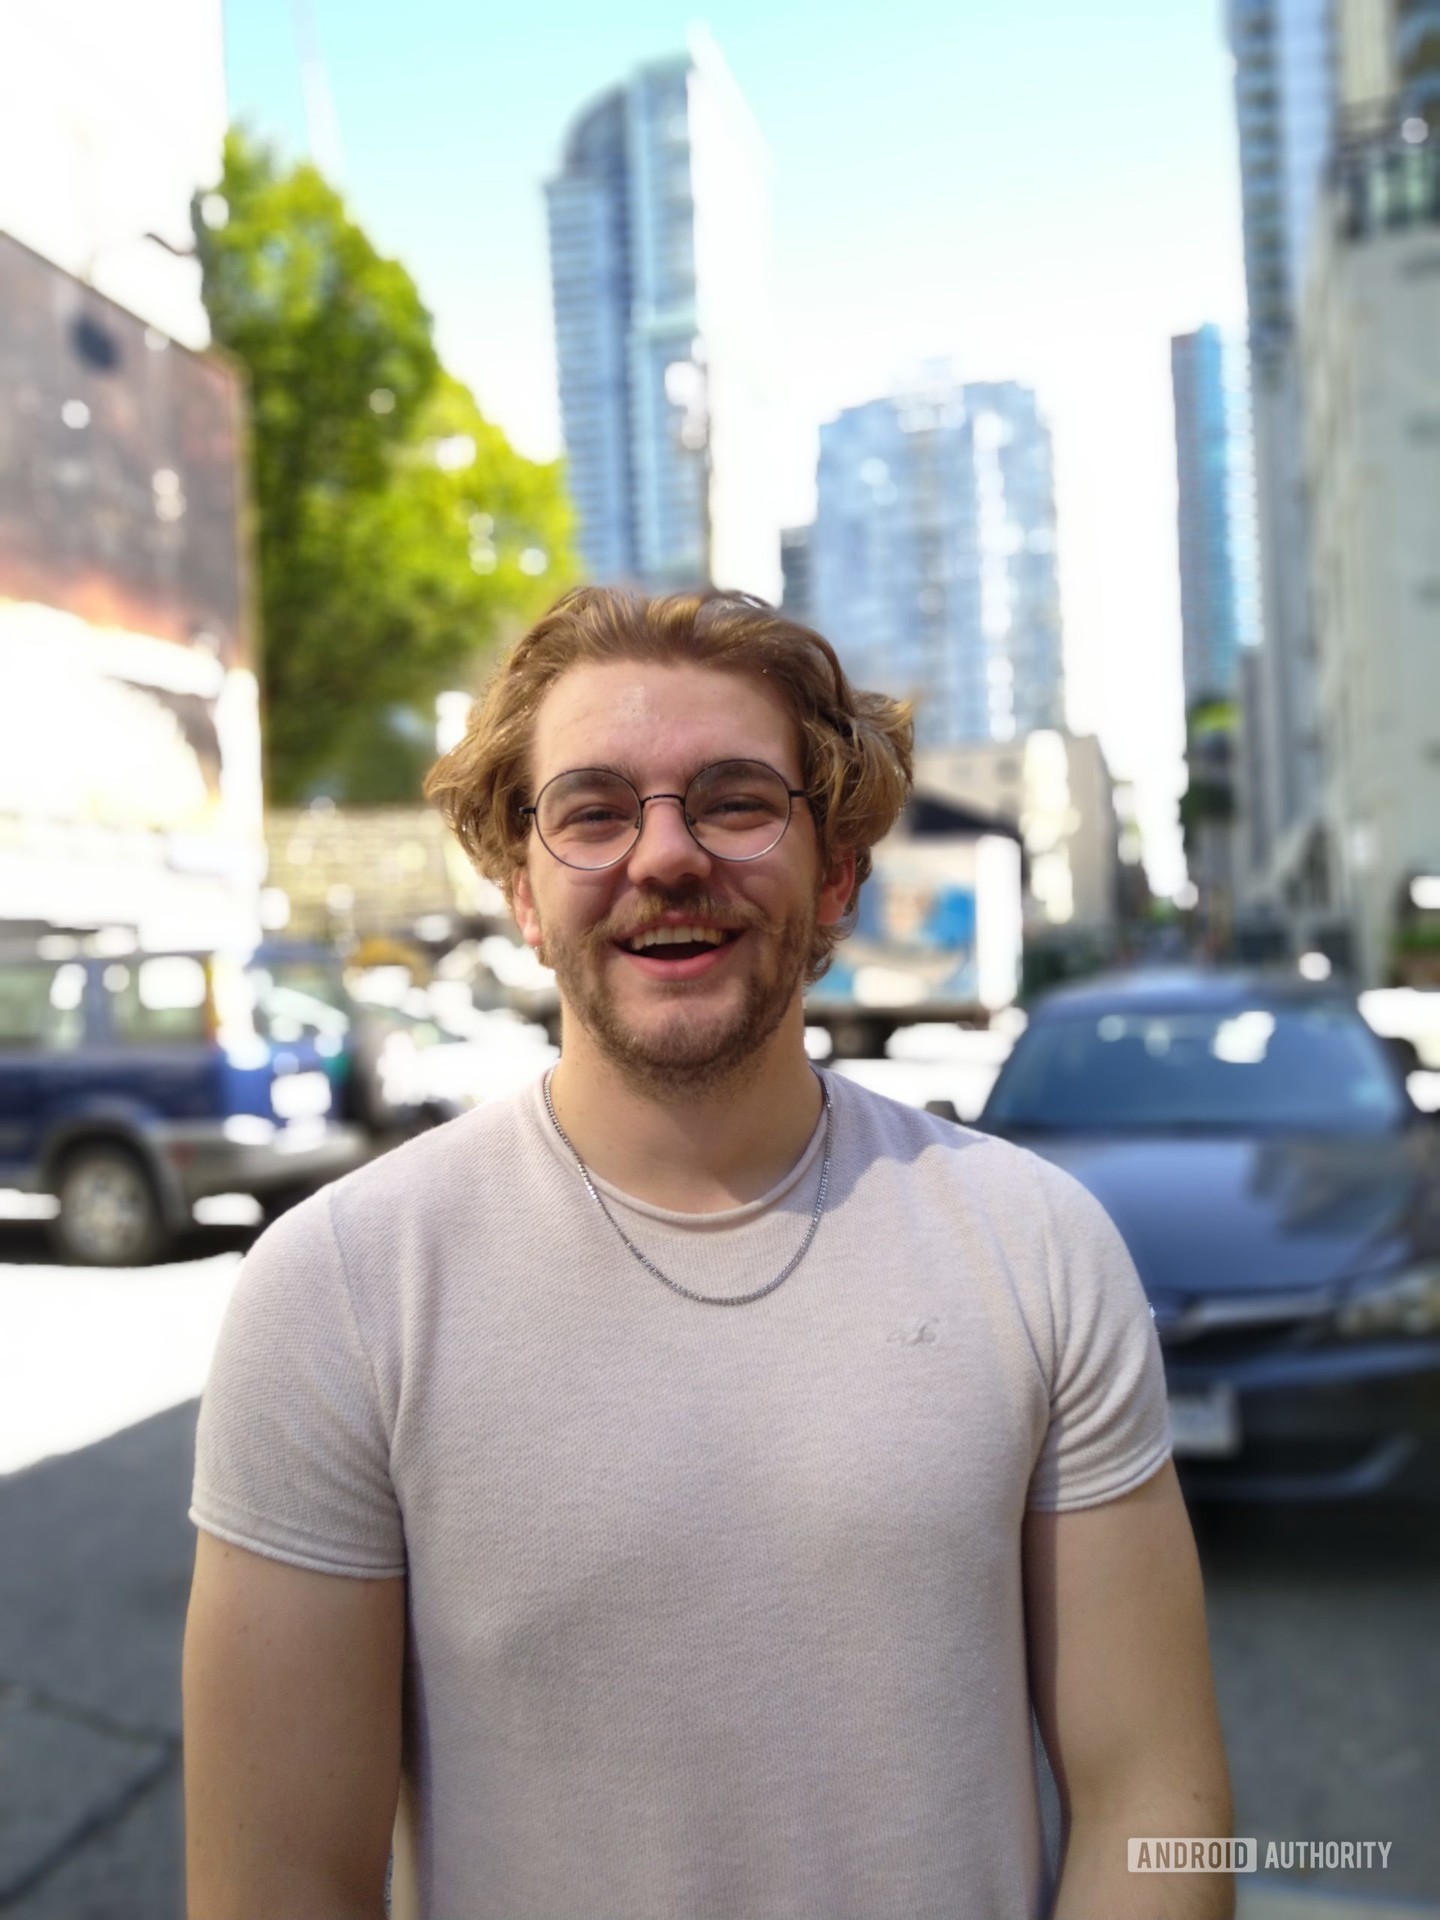 Cat S62 Pro Portrait photo of a man with wavy blond hair and a beard, wearing glasses and a white t-shirt.